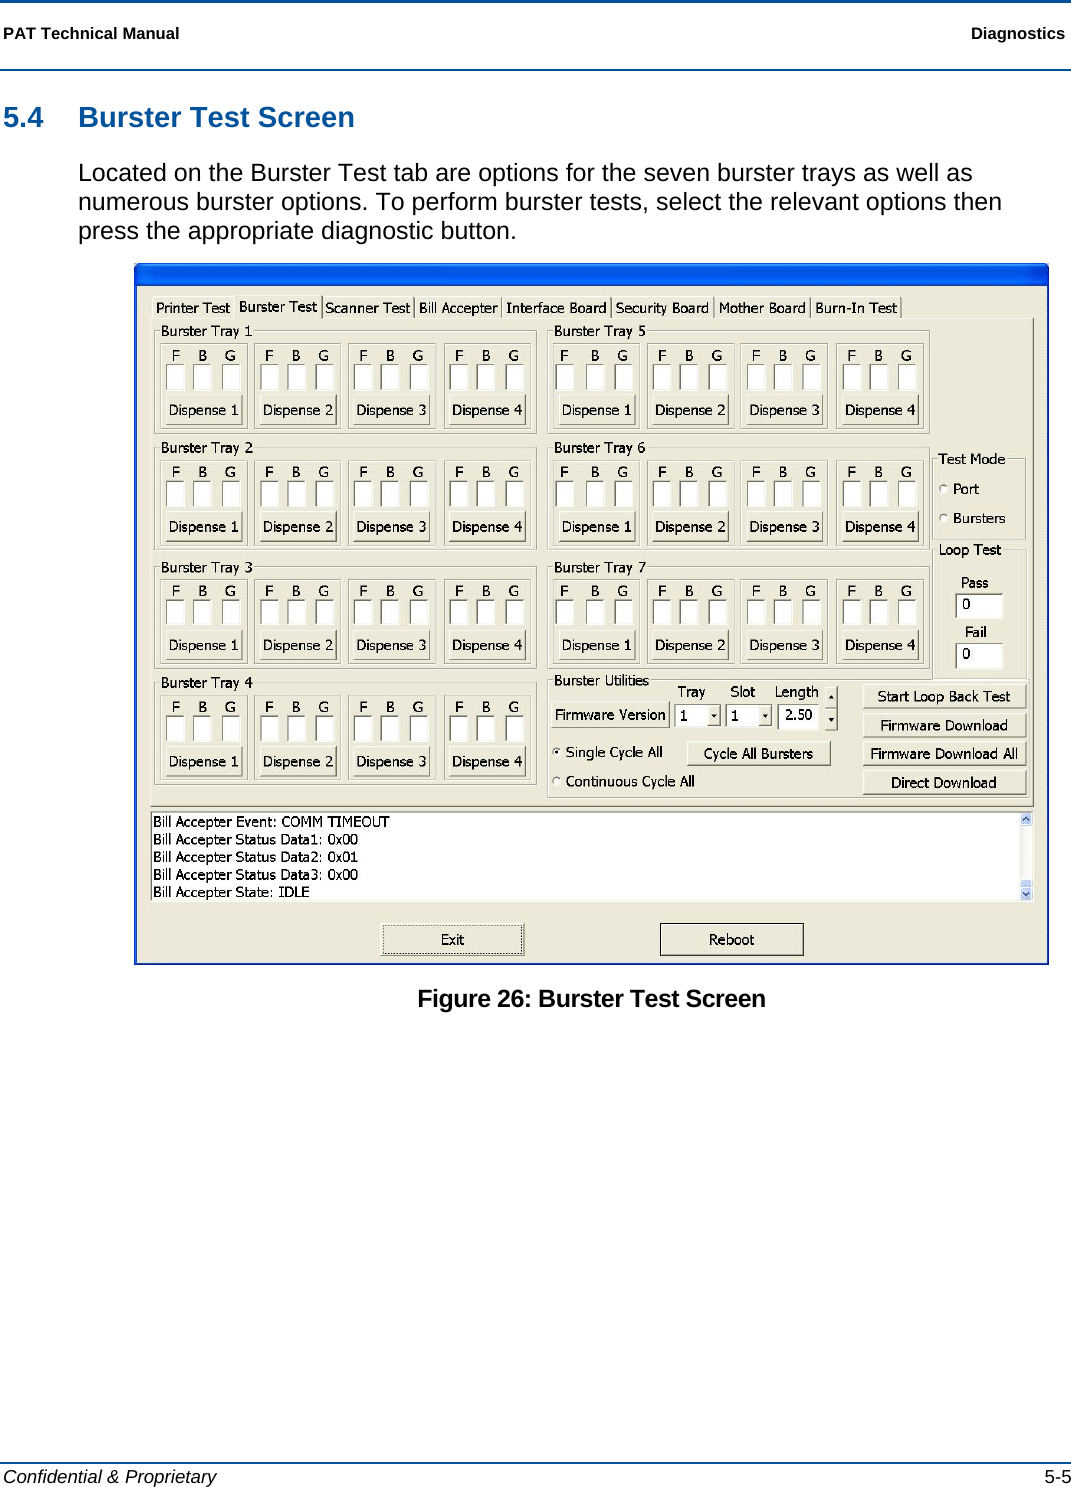  PAT Technical Manual  Diagnostics  Confidential &amp; Proprietary   5-5 5.4  Burster Test Screen Located on the Burster Test tab are options for the seven burster trays as well as numerous burster options. To perform burster tests, select the relevant options then press the appropriate diagnostic button.  Figure 26: Burster Test Screen 